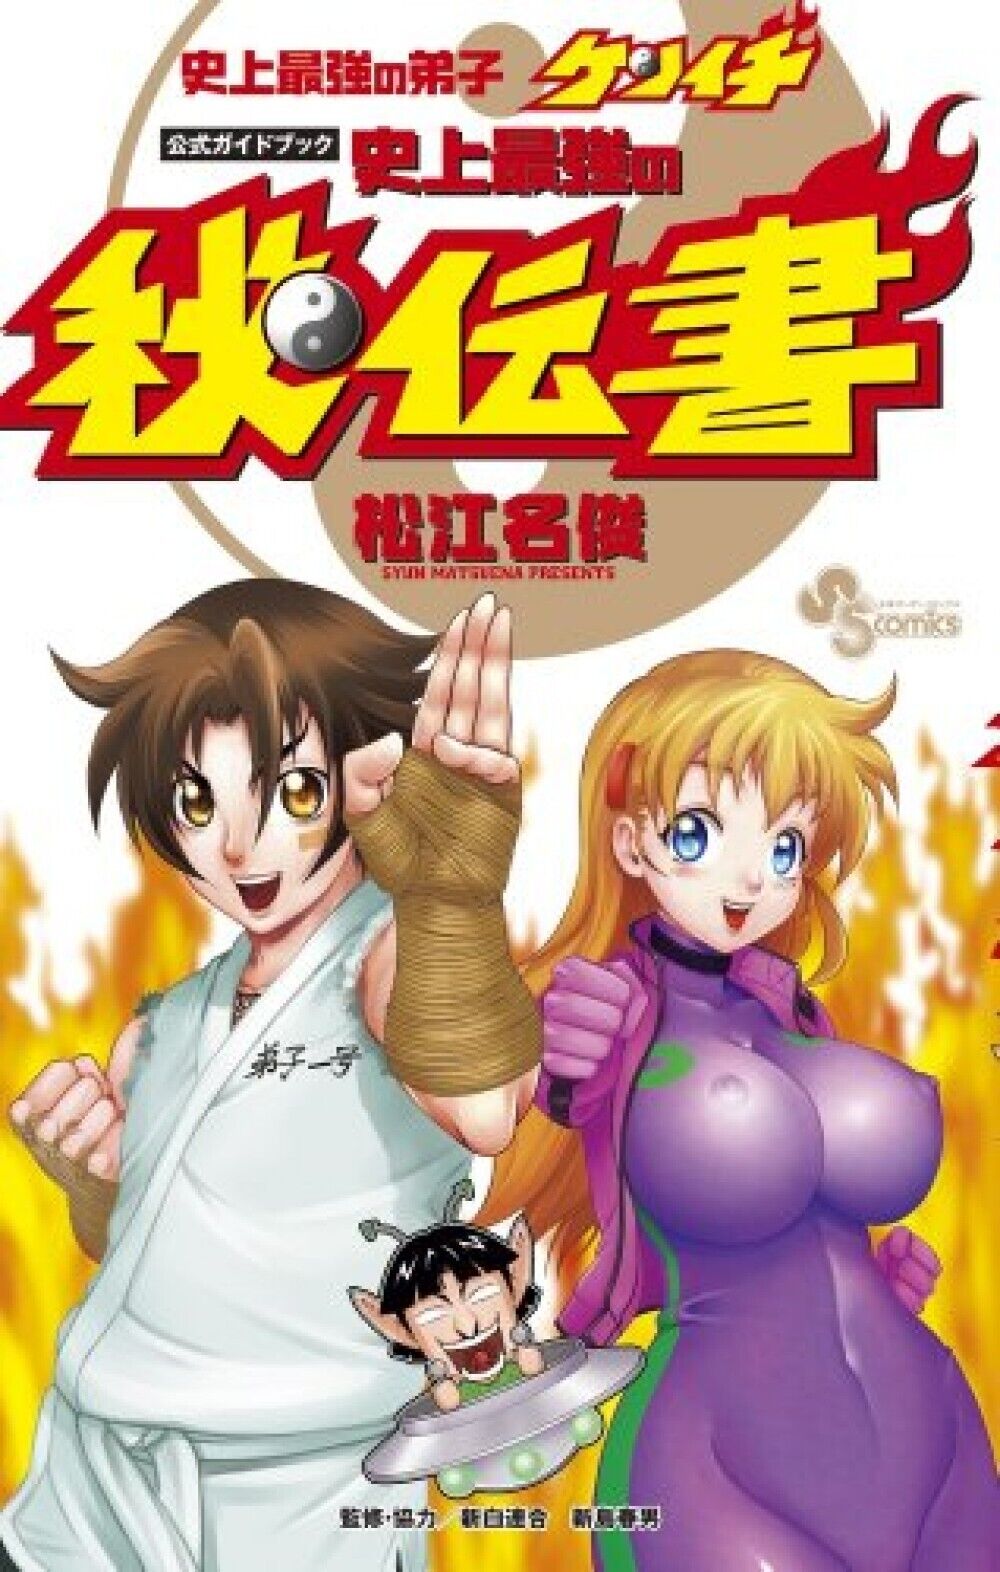 Kenichi: The Mightiest Disciple Official Guide Book used Japanese